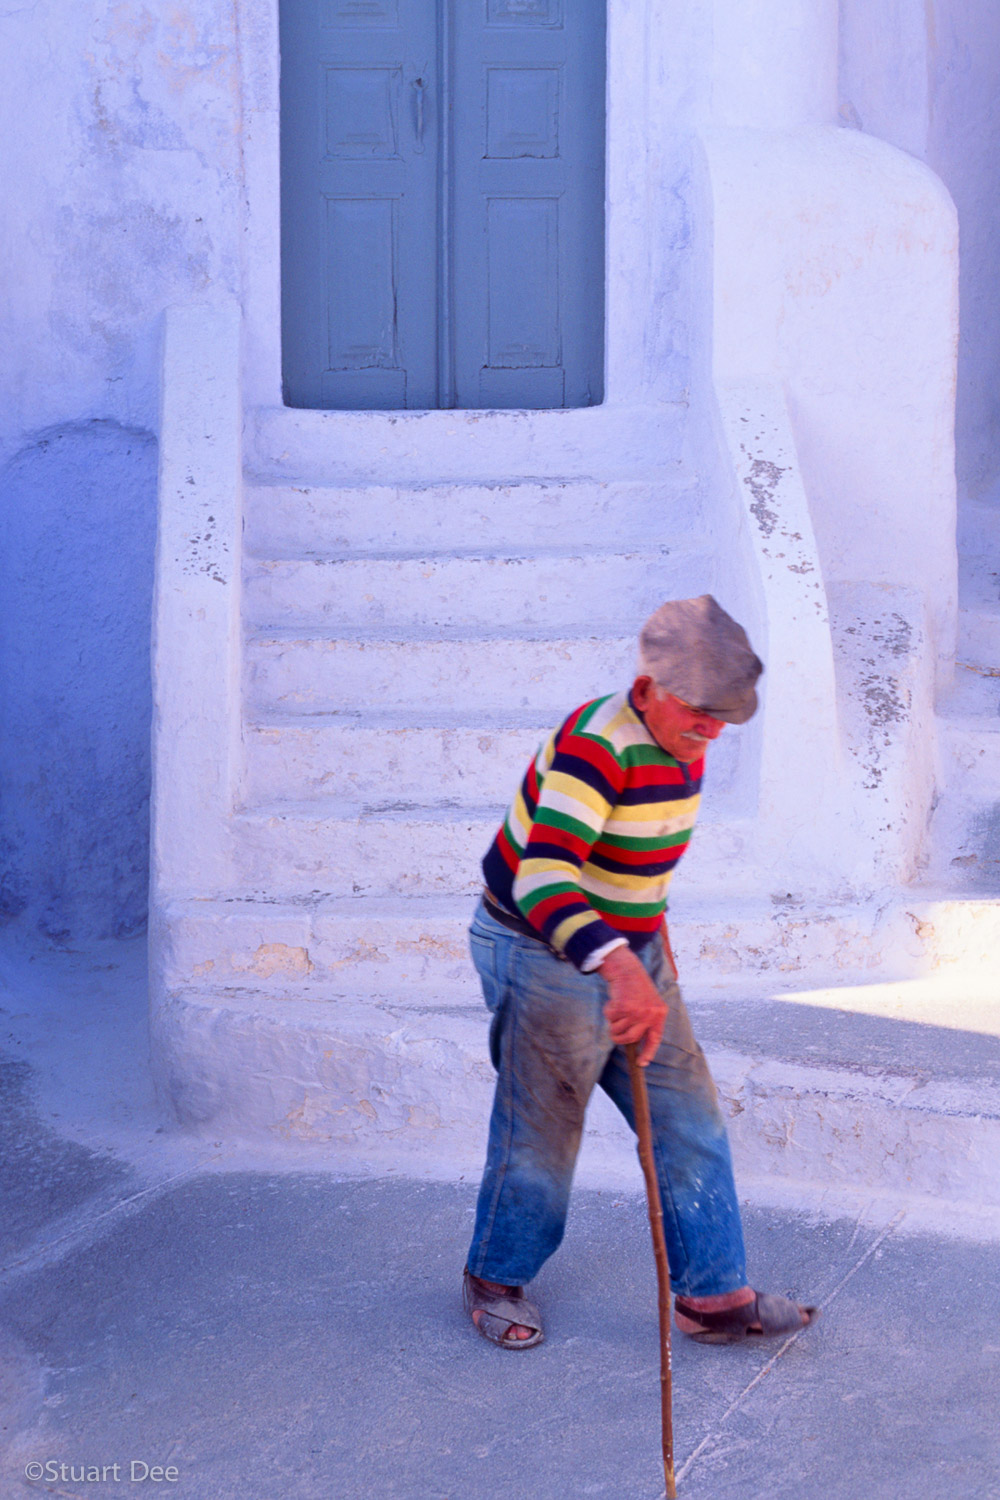  An older man walking with a cane, seen in front of a door, Pygros, Santorini, Greece 